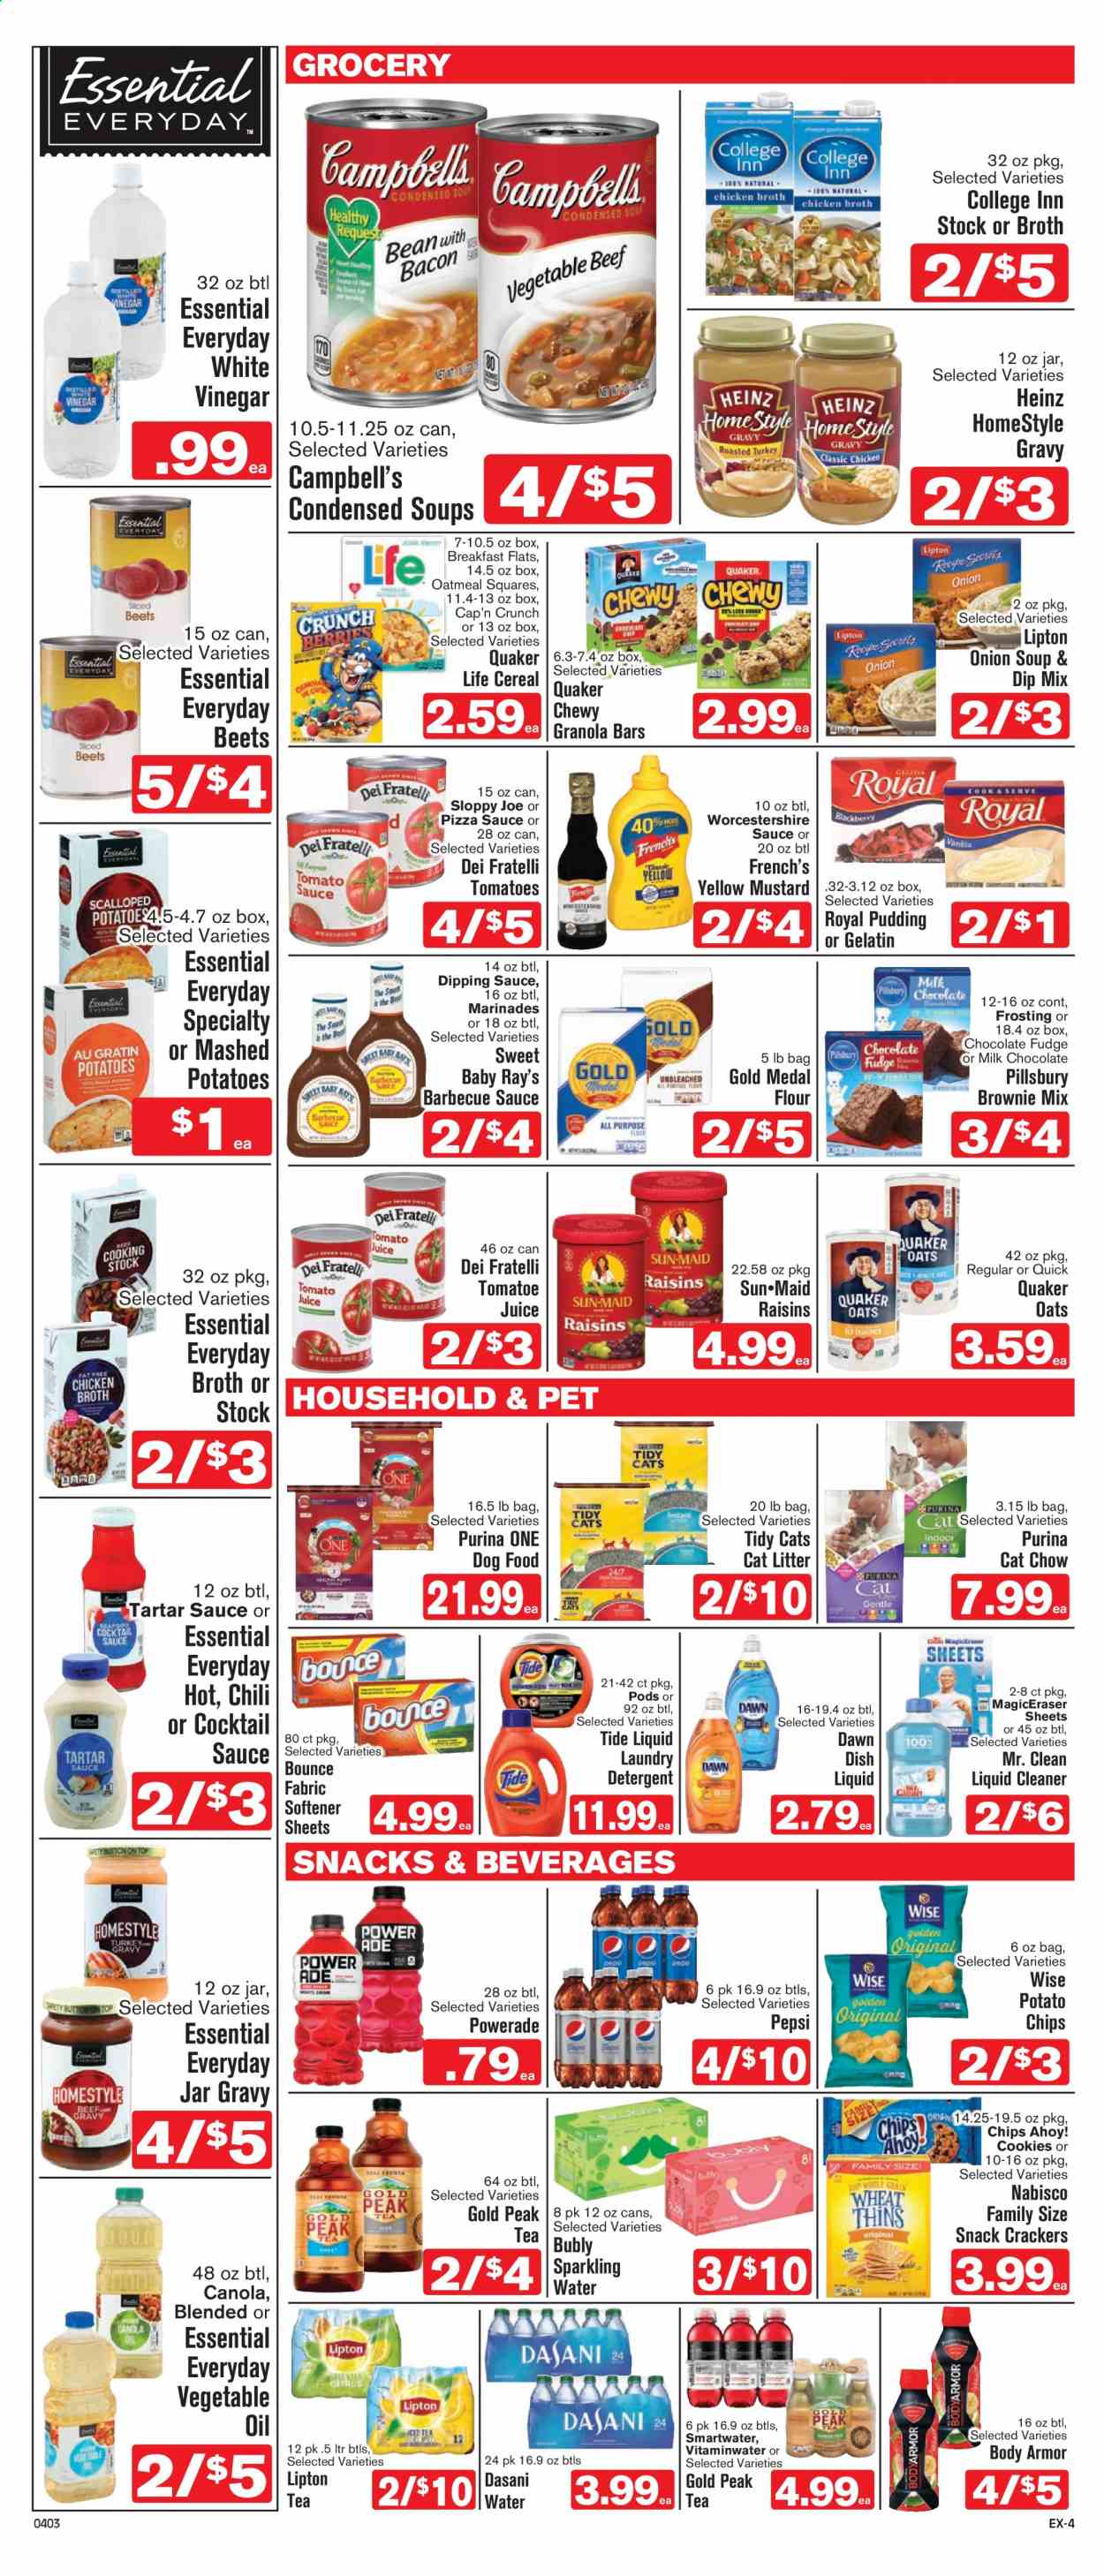 thumbnail - Shop ‘n Save Express Flyer - 04/03/2021 - 04/09/2021 - Sales products - brownie mix, tomatoes, Campbell's, mashed potatoes, pizza, onion soup, soup, Pillsbury, Quaker, pudding, tartar sauce, dip, cookies, fudge, milk chocolate, chocolate, crackers, Chips Ahoy!, potato chips, chips, snack, flour, frosting, oatmeal, oats, broth, Heinz, cereals, granola bar, Cap'n Crunch, BBQ sauce, cocktail sauce, mustard, worcestershire sauce, homestyle gravy, vegetable oil, raisins, Powerade, Pepsi, juice, Lipton, Gold Peak Tea, tea, detergent, cleaner, liquid cleaner, Tide, fabric softener, laundry detergent, Bounce, dishwashing liquid, animal food, dog food, Purina, gelatin. Page 4.